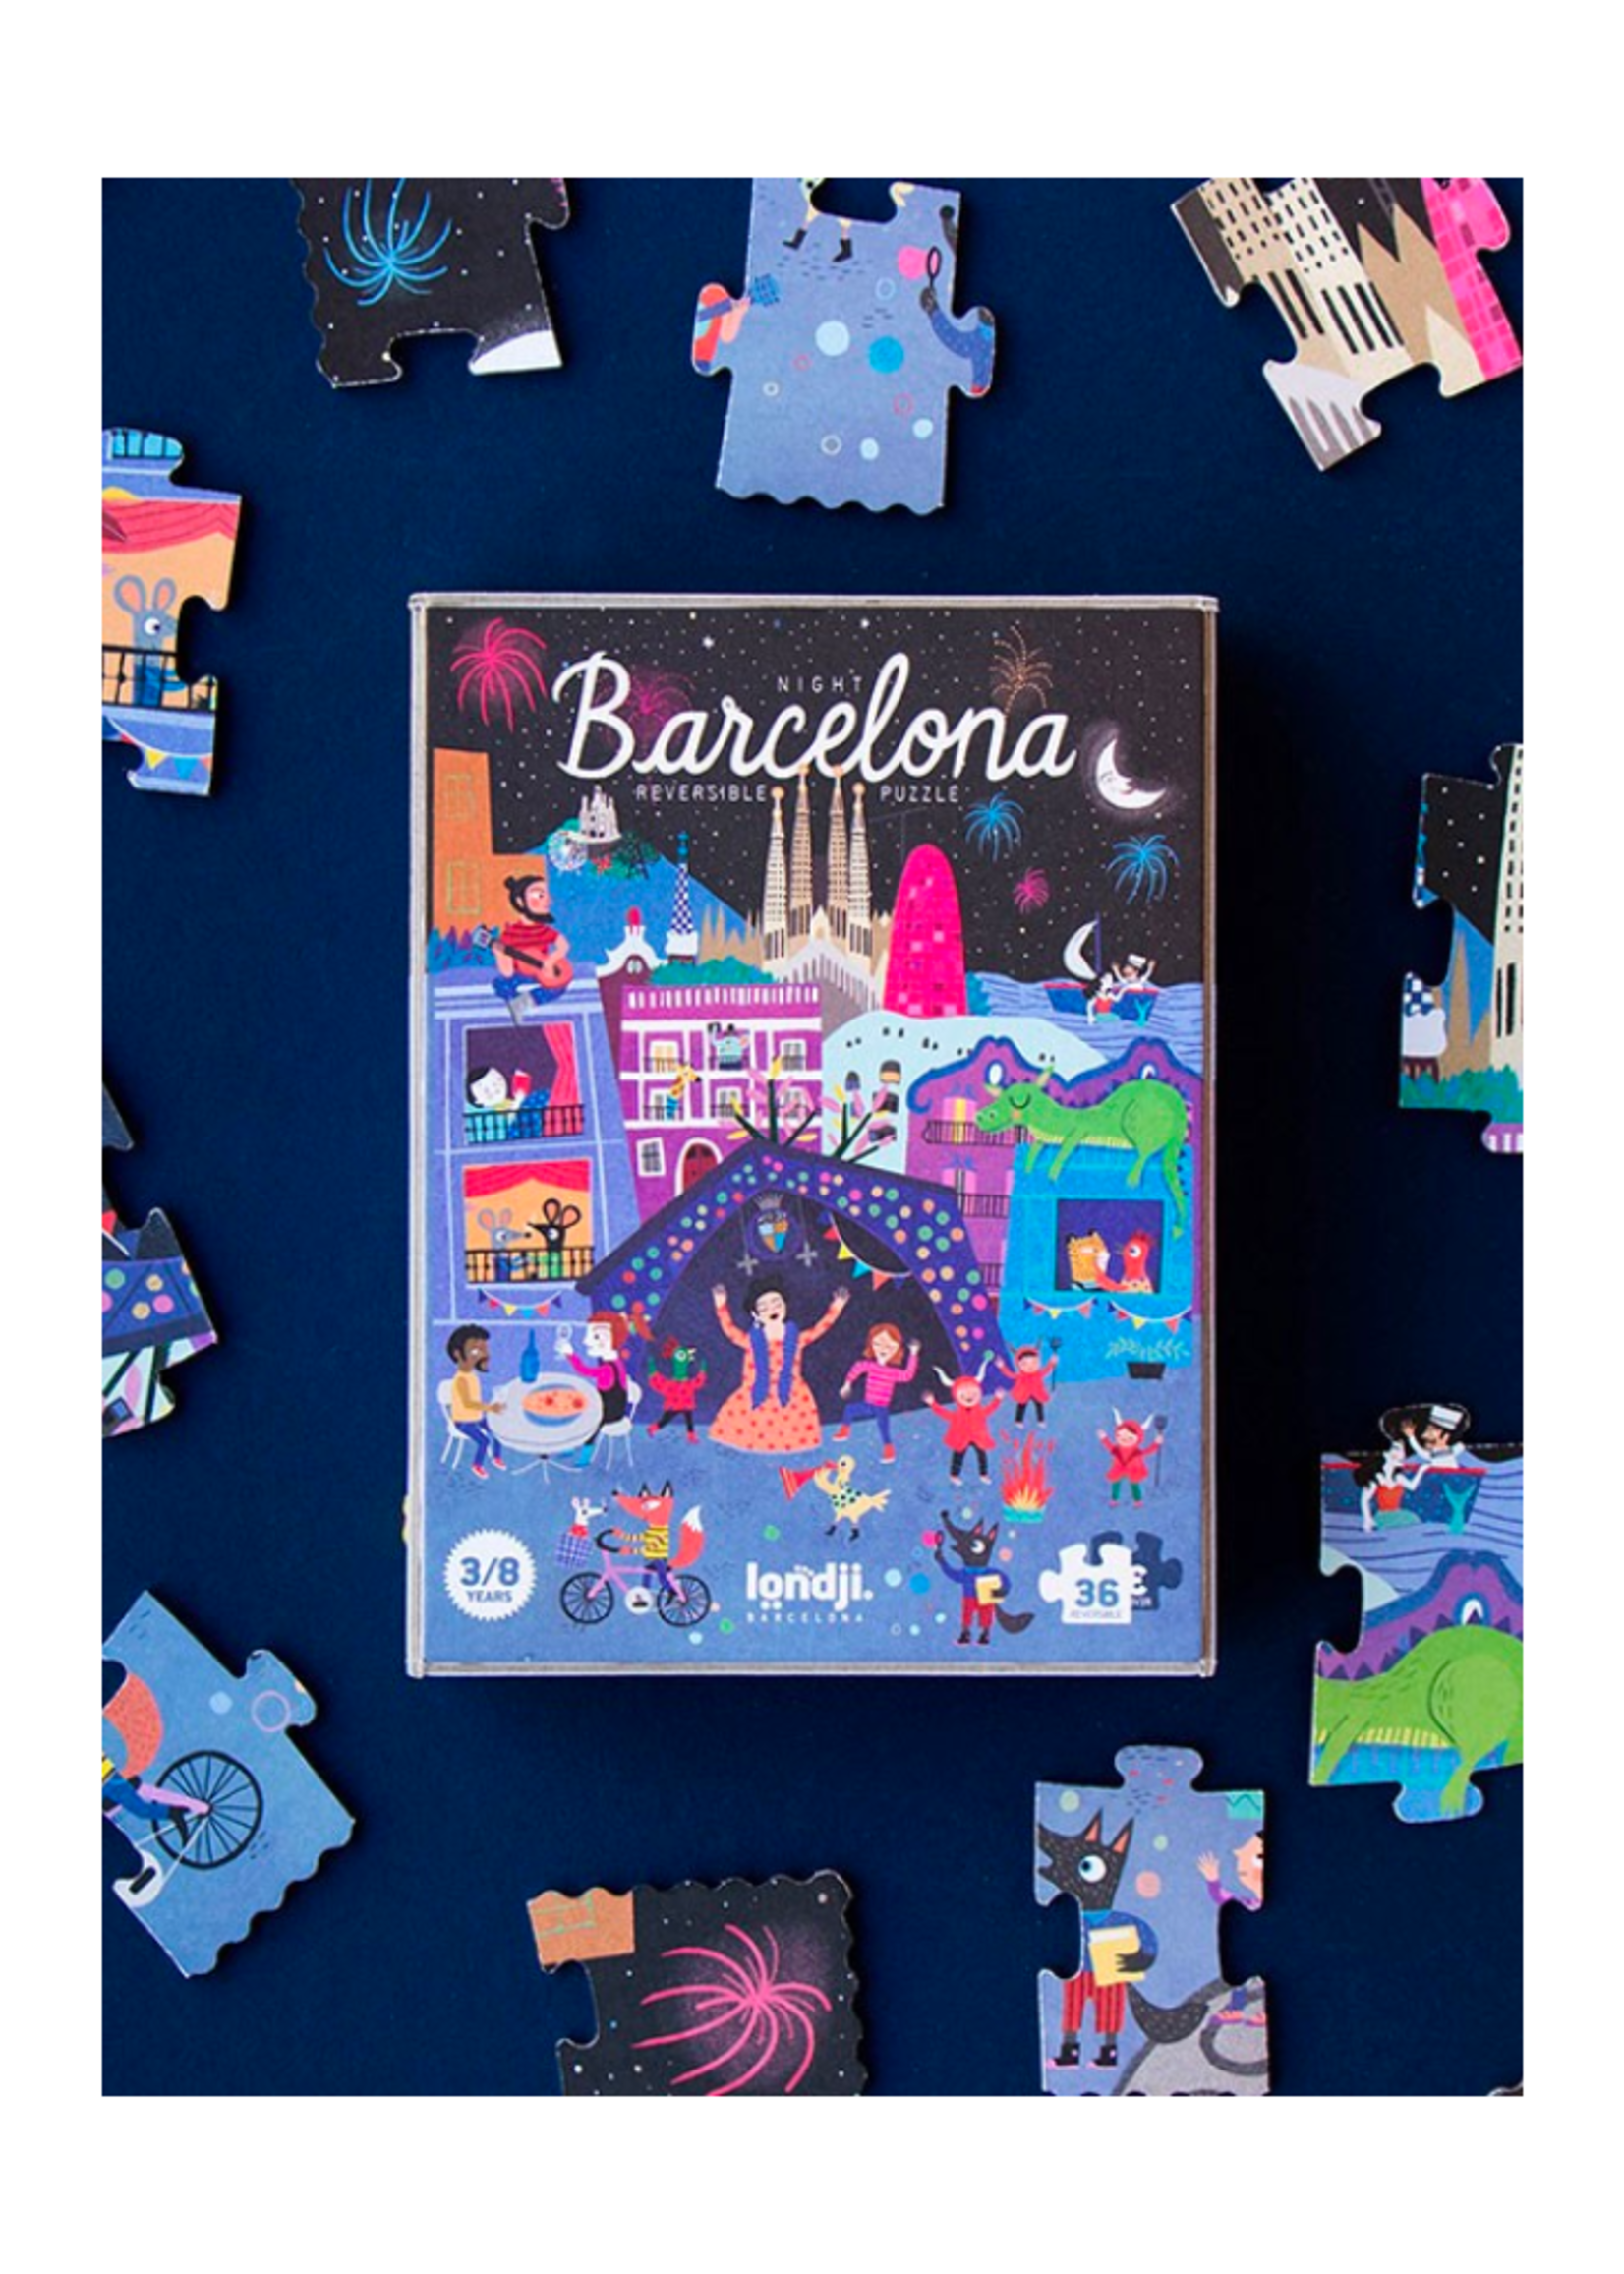 Londji Night & Day in Barcelona Reversible Puzzle - 36 Pieces